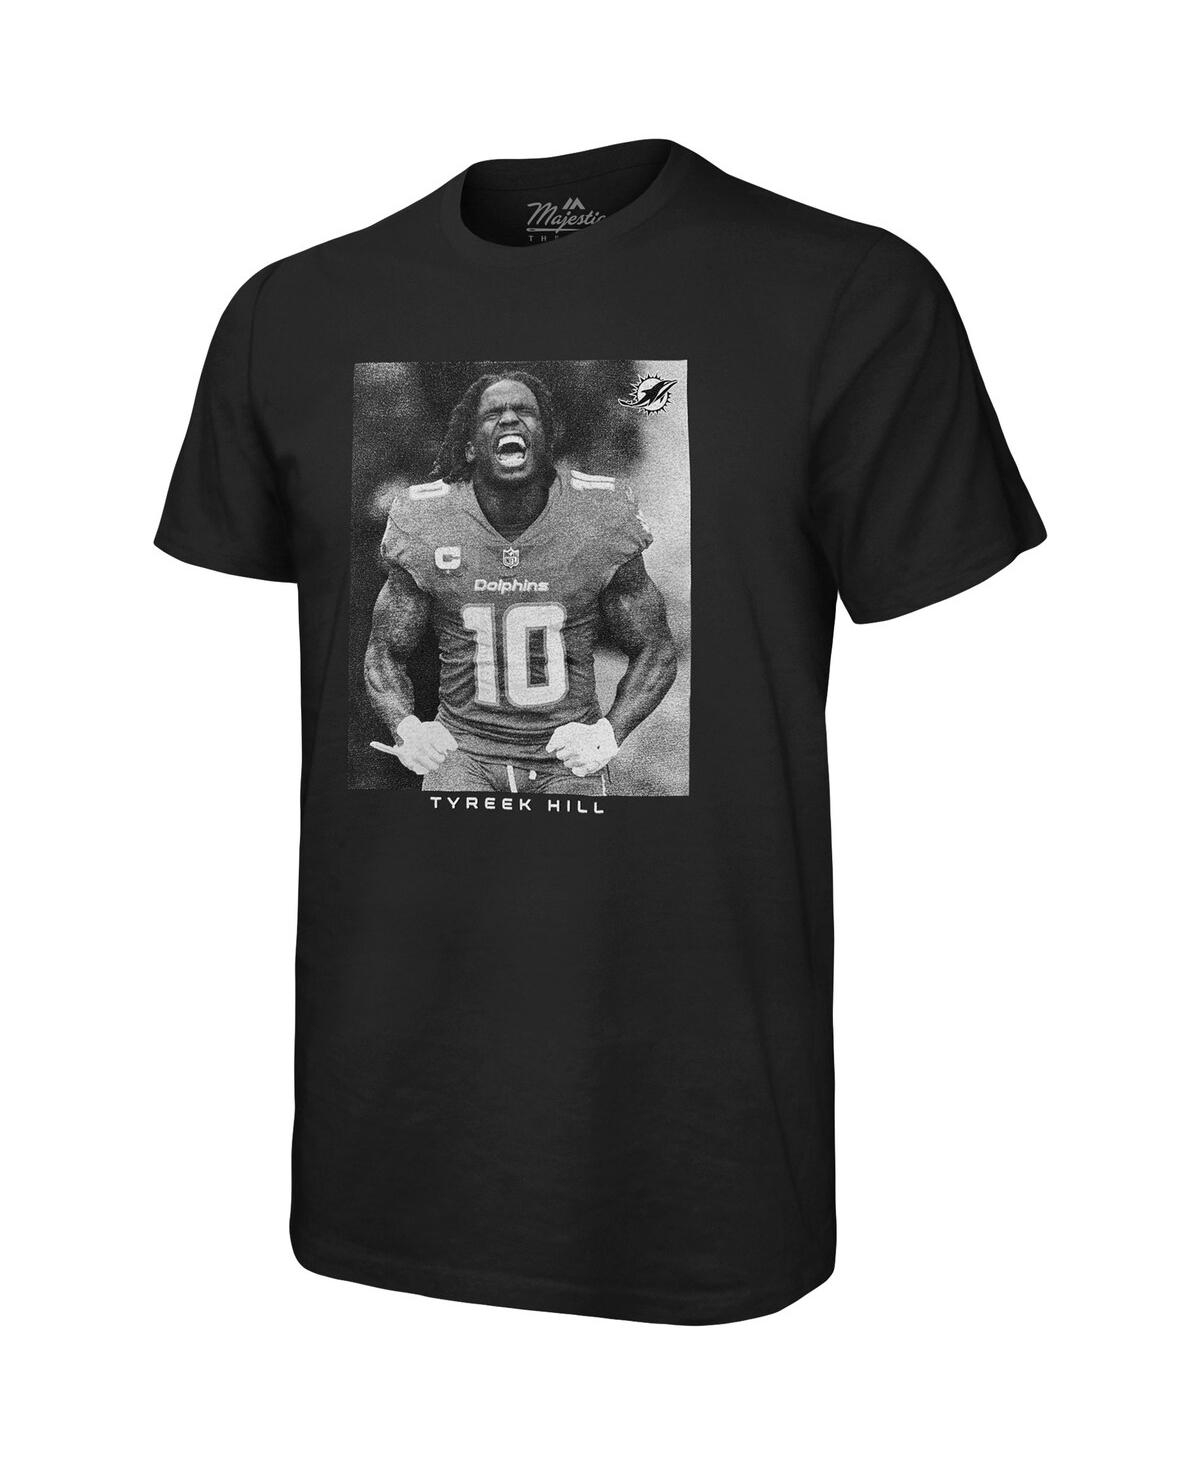 Shop Majestic Men's  Threads Tyreek Hill Black Miami Dolphins Oversized Player Image T-shirt